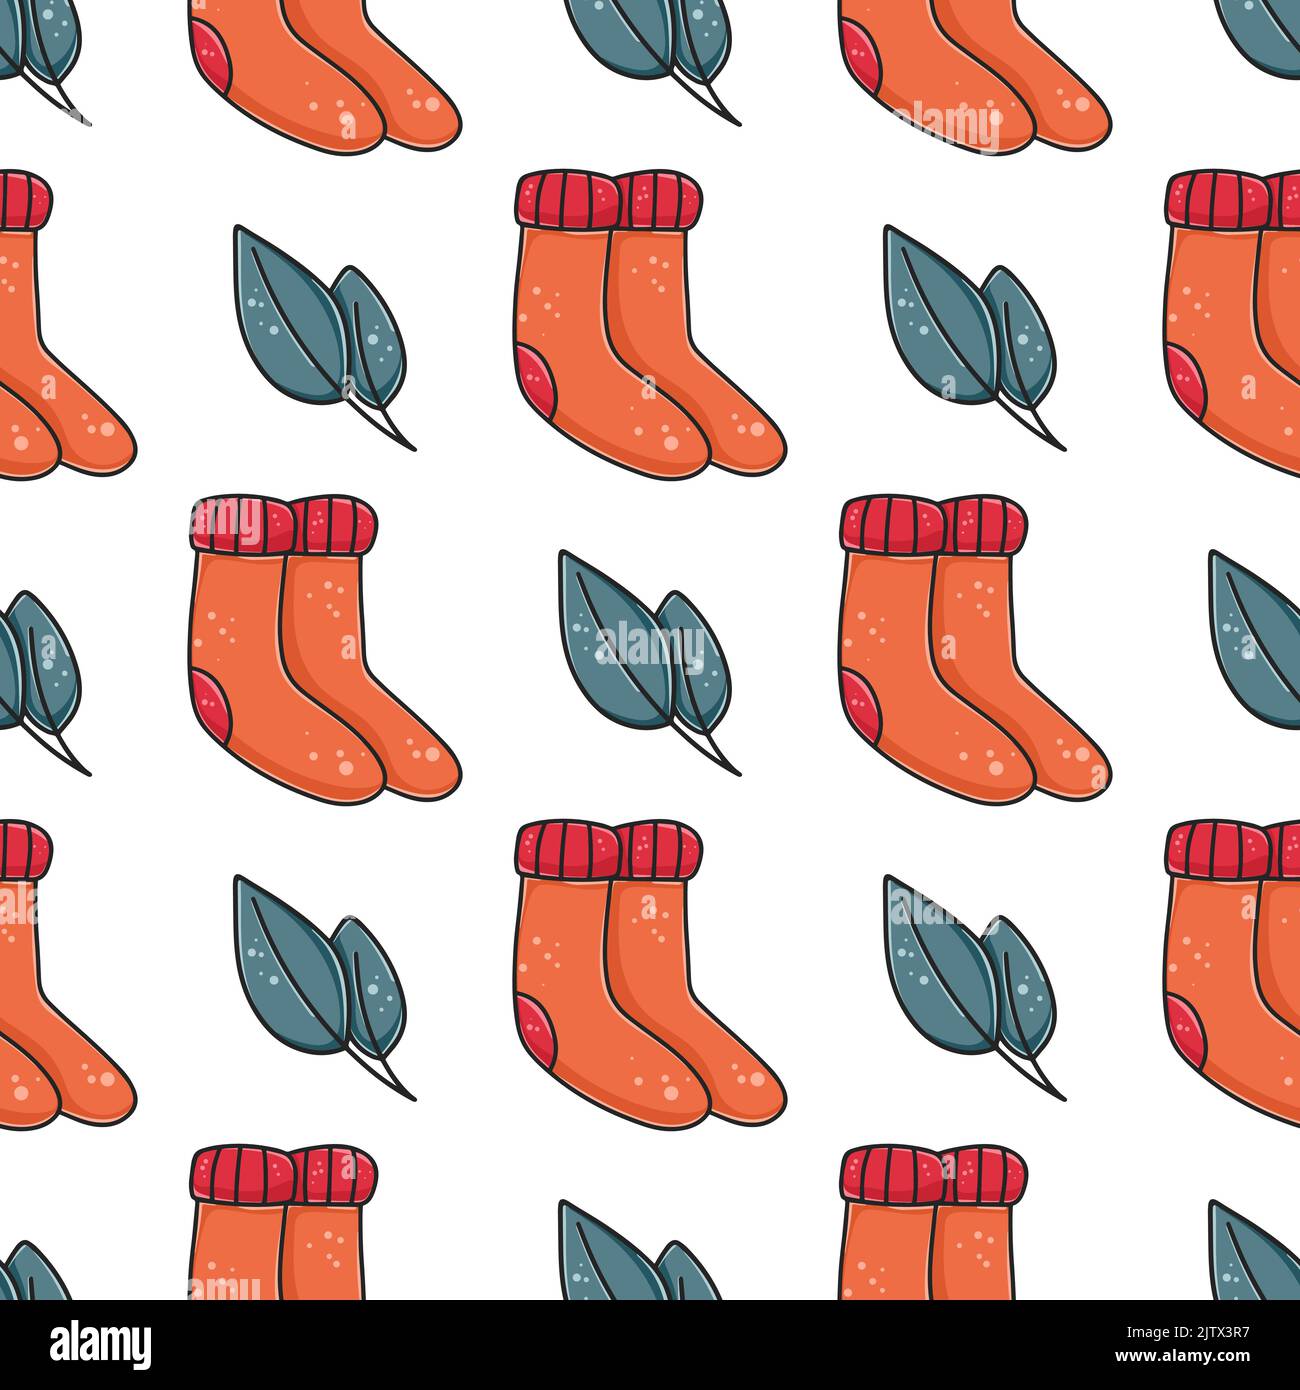 Autumn background with warm knitted socks and leaves. Seamless cozy seasonal pattern. Print with autumn symbols for textiles, paper, packaging and des Stock Vector